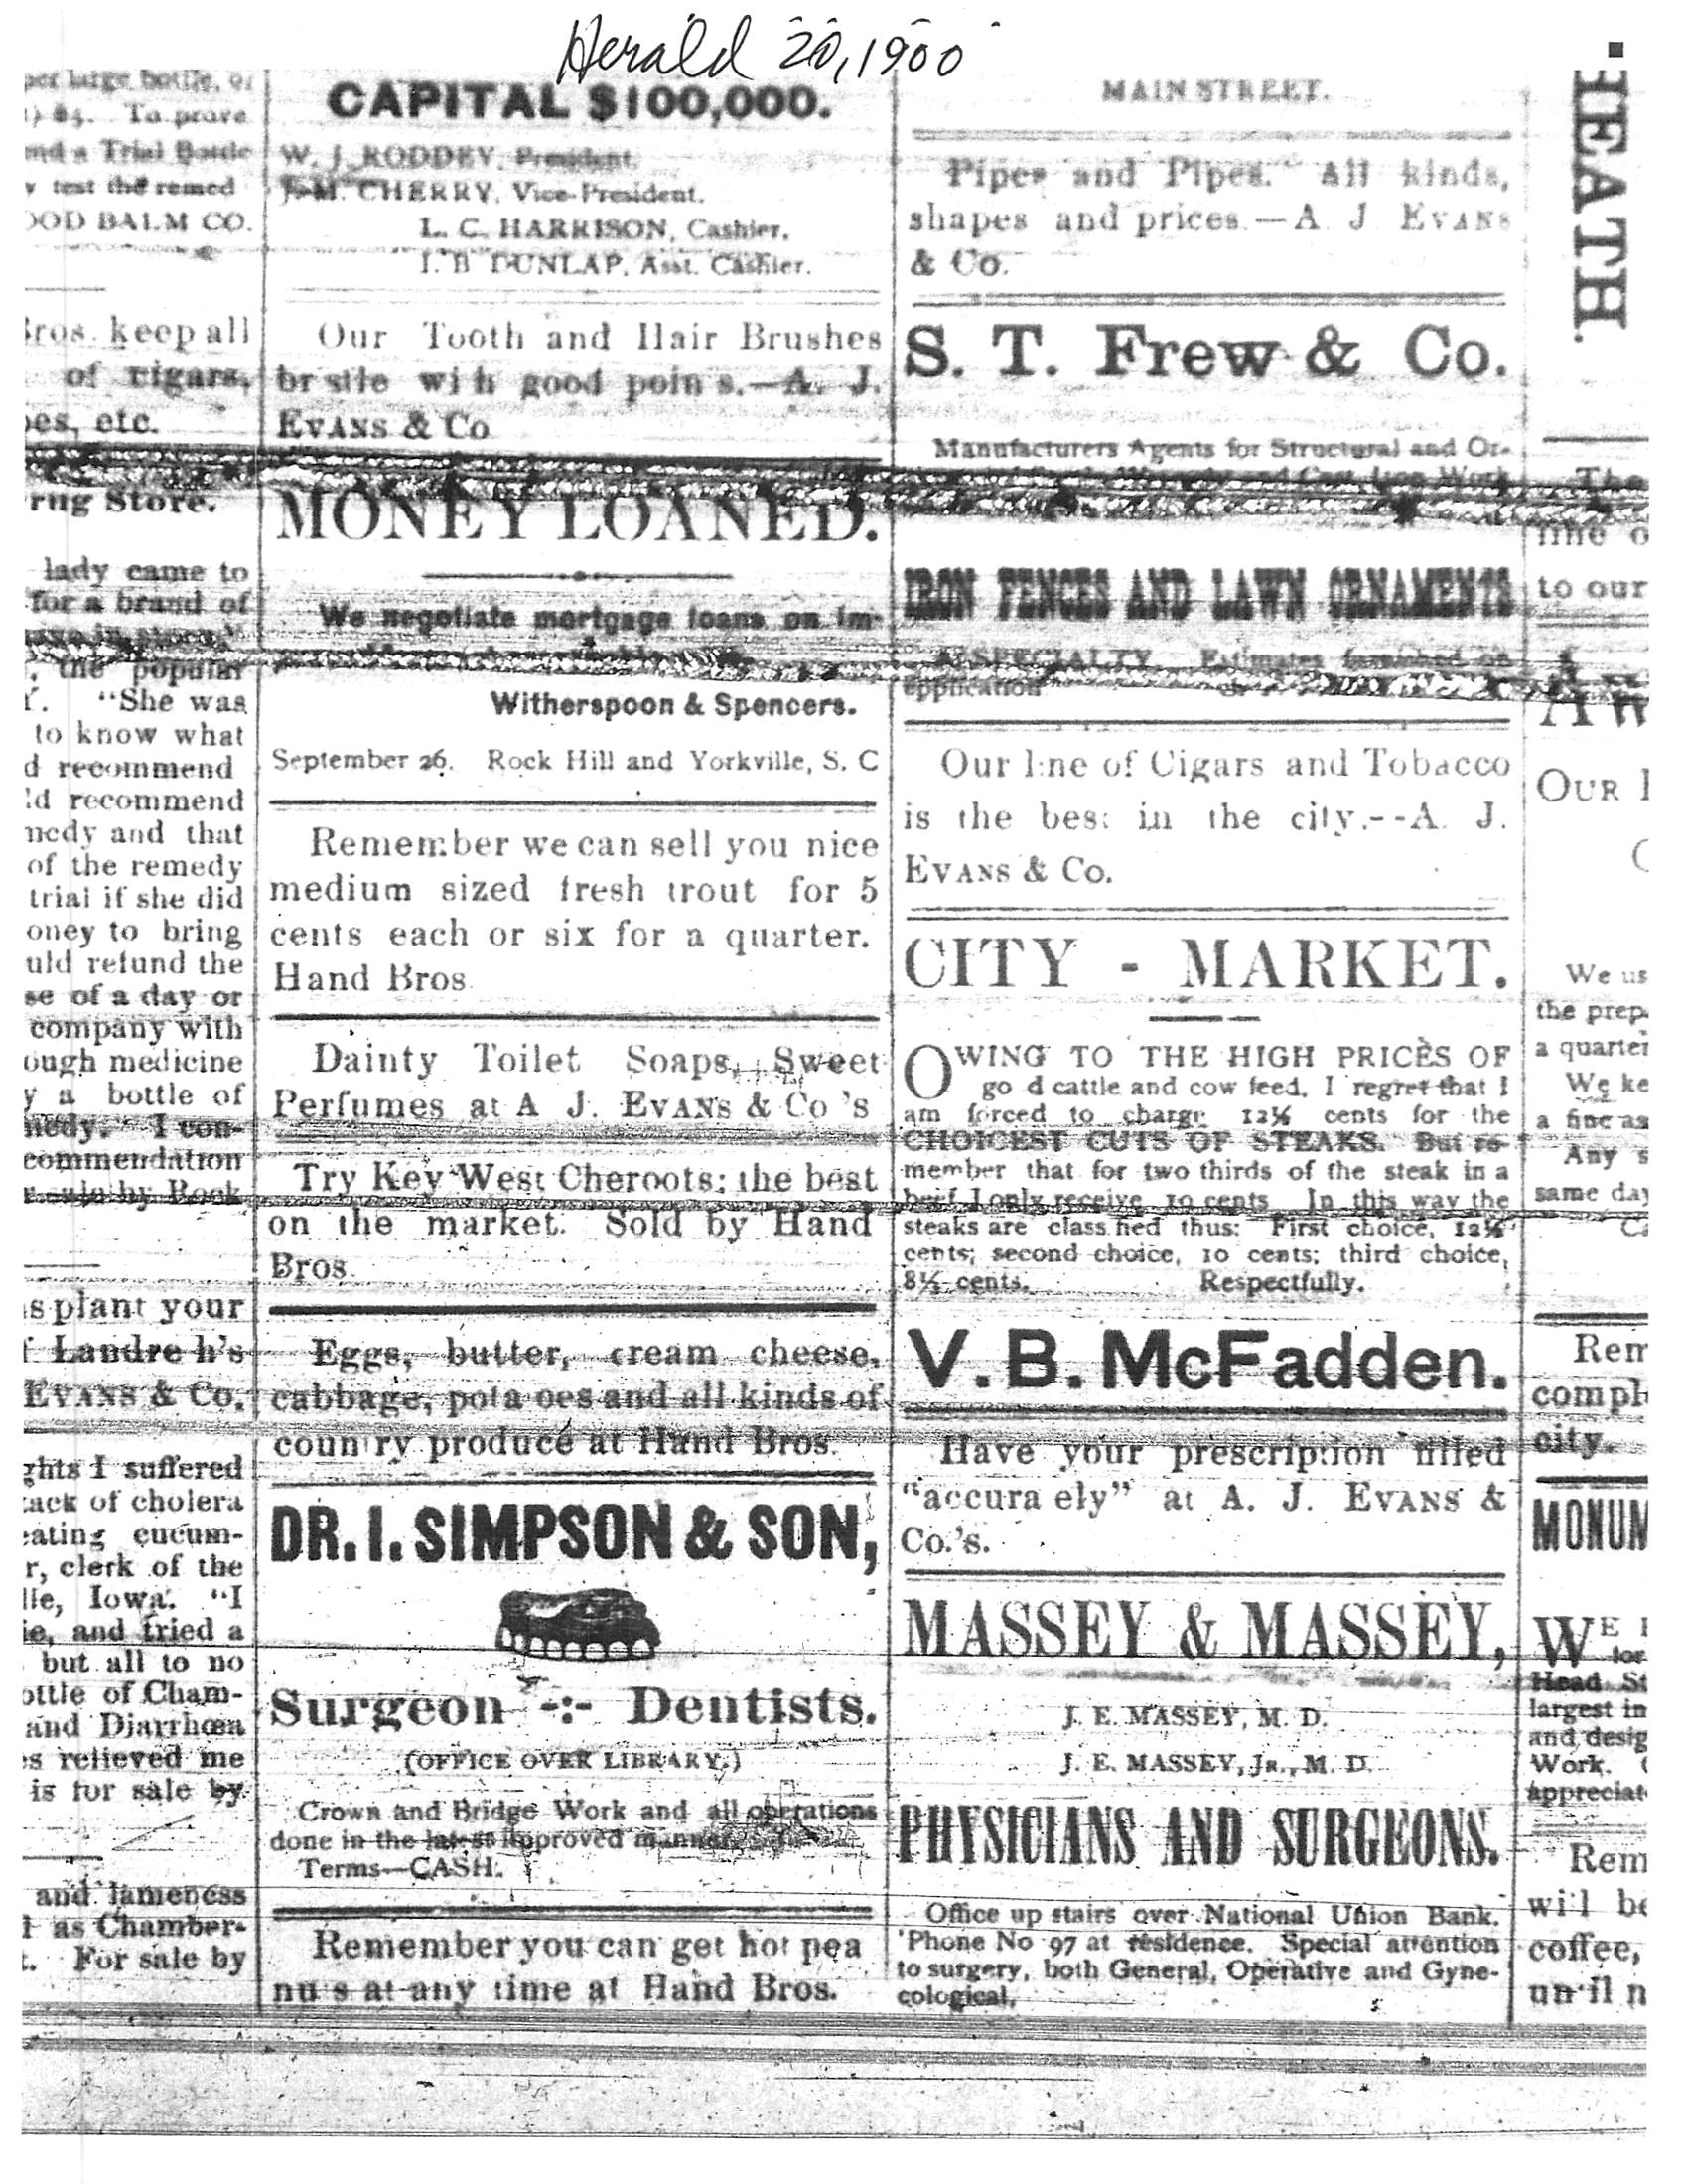 Ad for Dr. I. Simpson and Son of Rock Hill, S.C.